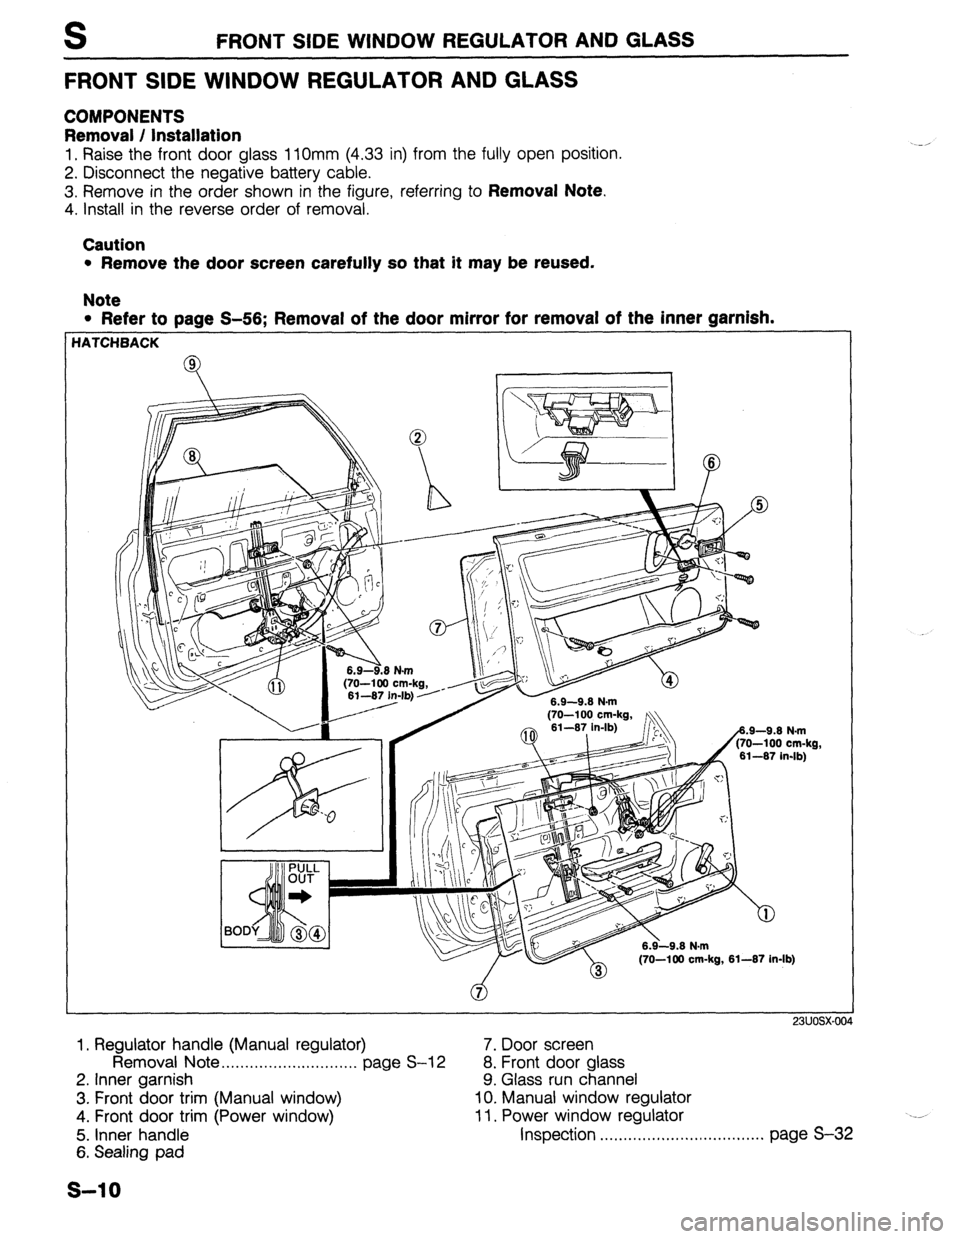 MAZDA PROTEGE 1992  Workshop Manual FRONT SIDE WINDOW REGULATOR AND GLASS 
FRONT SIDE WINDOW REGULATOR AND GLASS 
COMPONENTS 
Removal / Installation 
1, Raise the front door glass 1 1Omm (4.33 in) from the fully open position. 
2. Disco